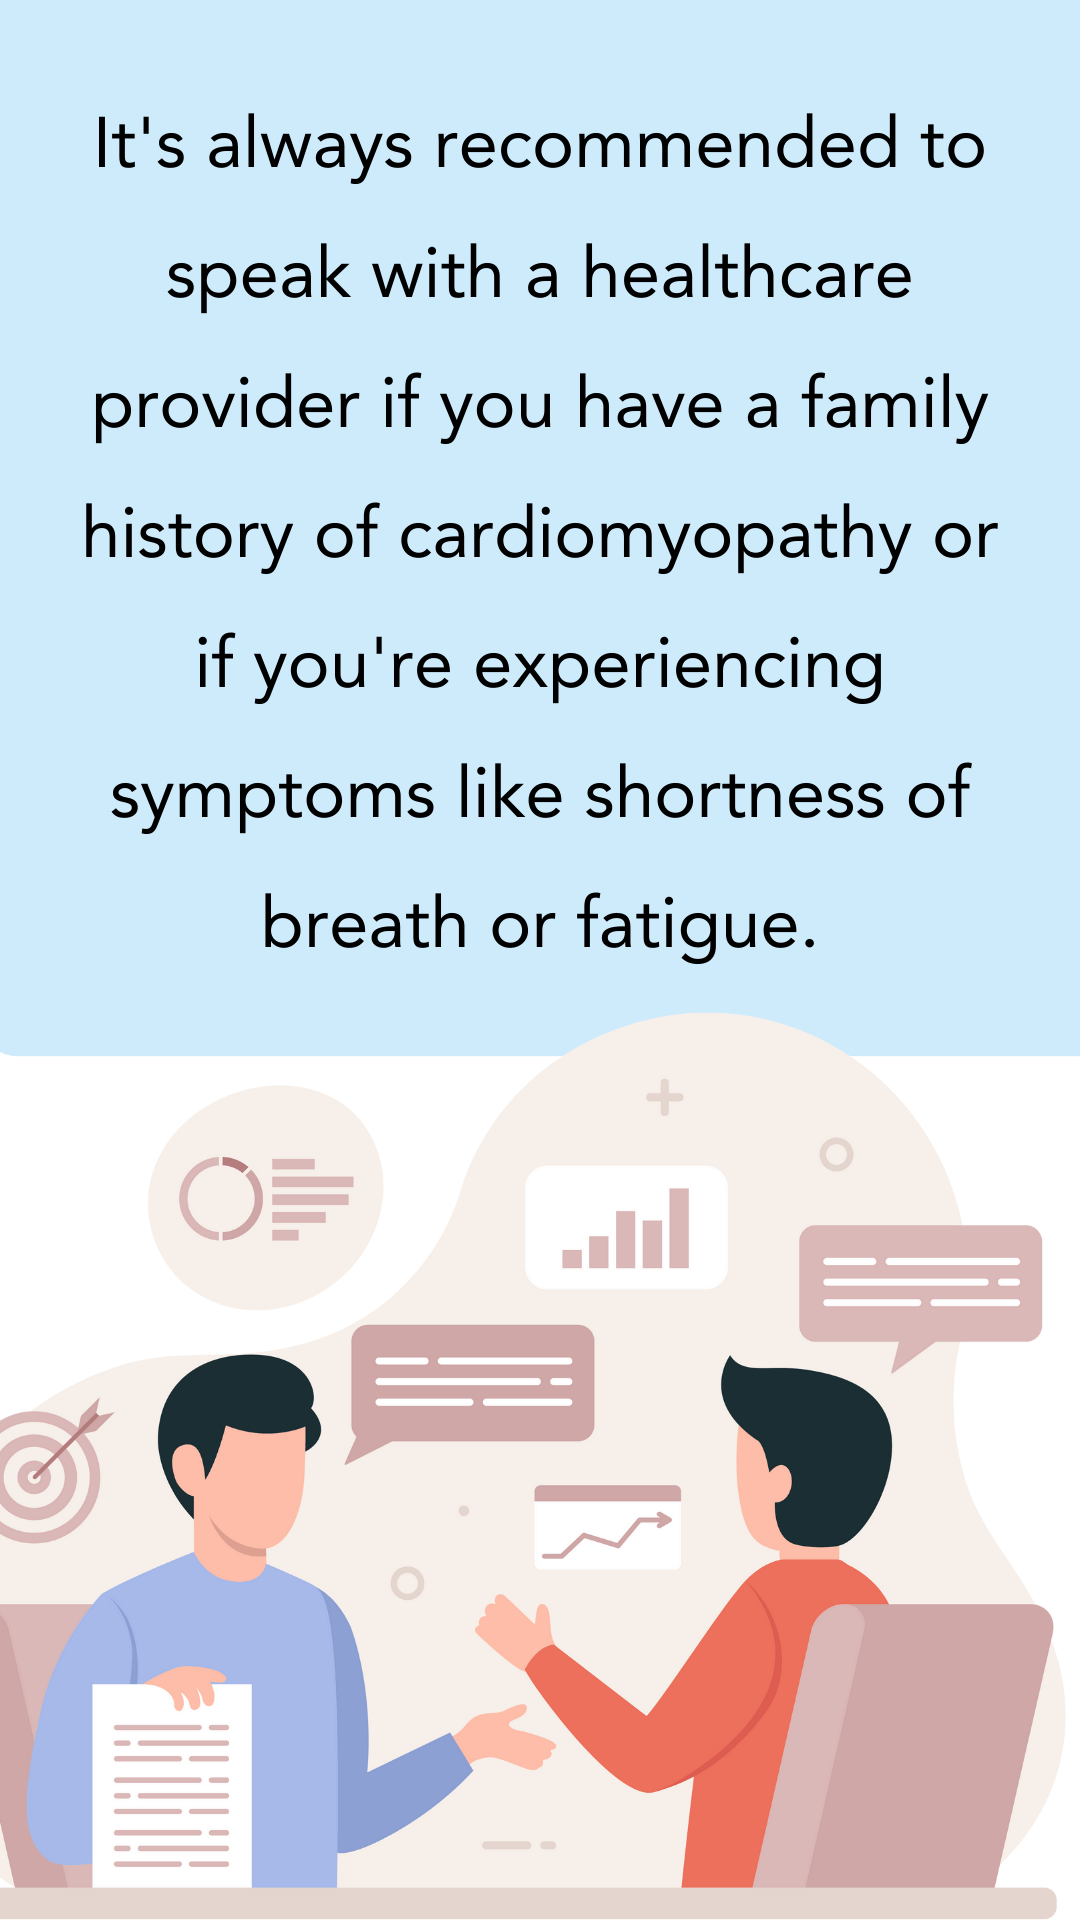 If you have cardiomyopathy in your family- speak to a healthcare professional.